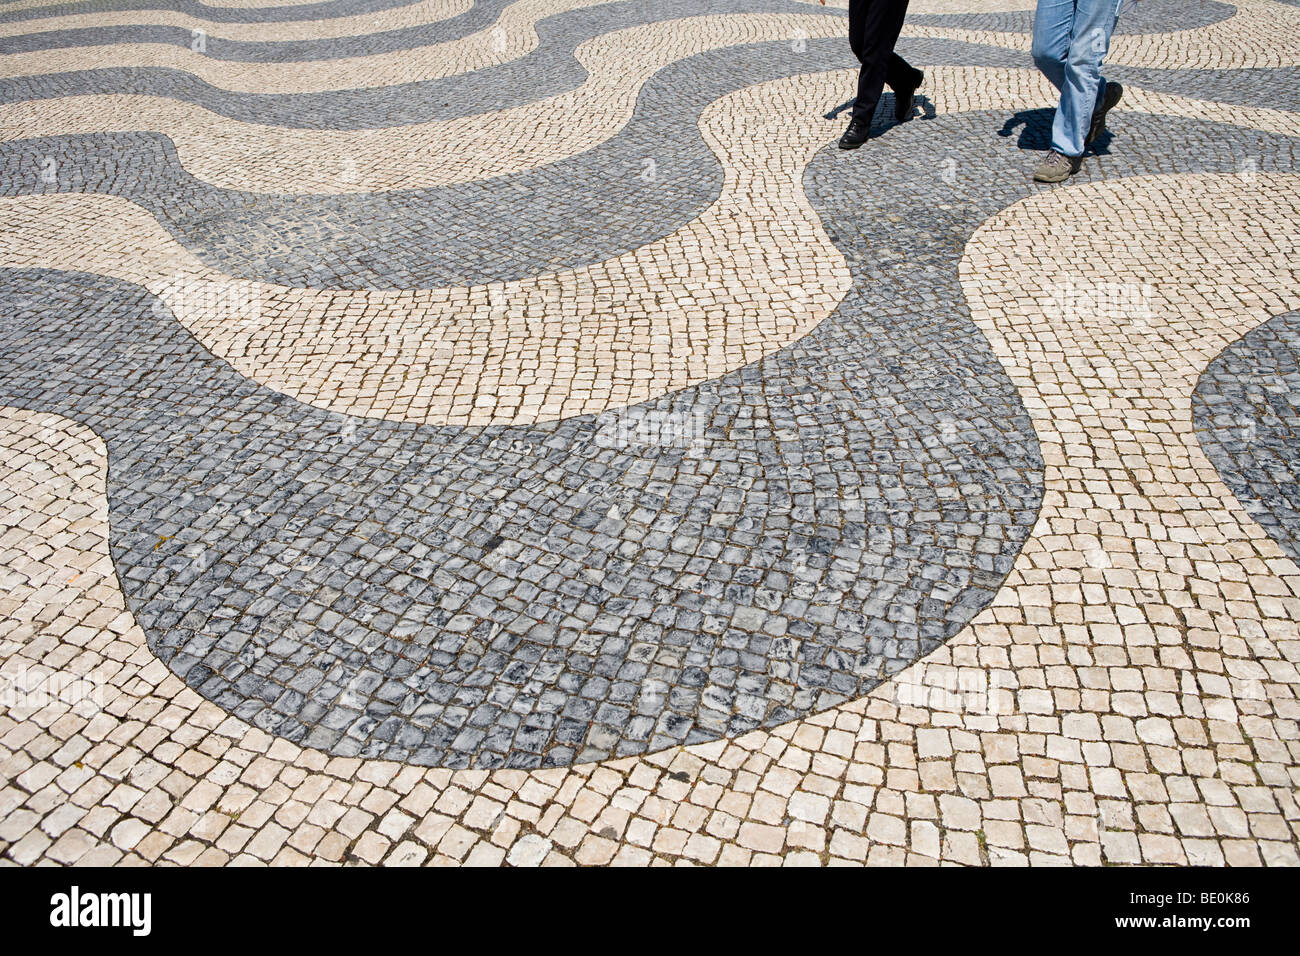 People walking on a typical Portuguese pavement, Portugal, Europe Stock Photo